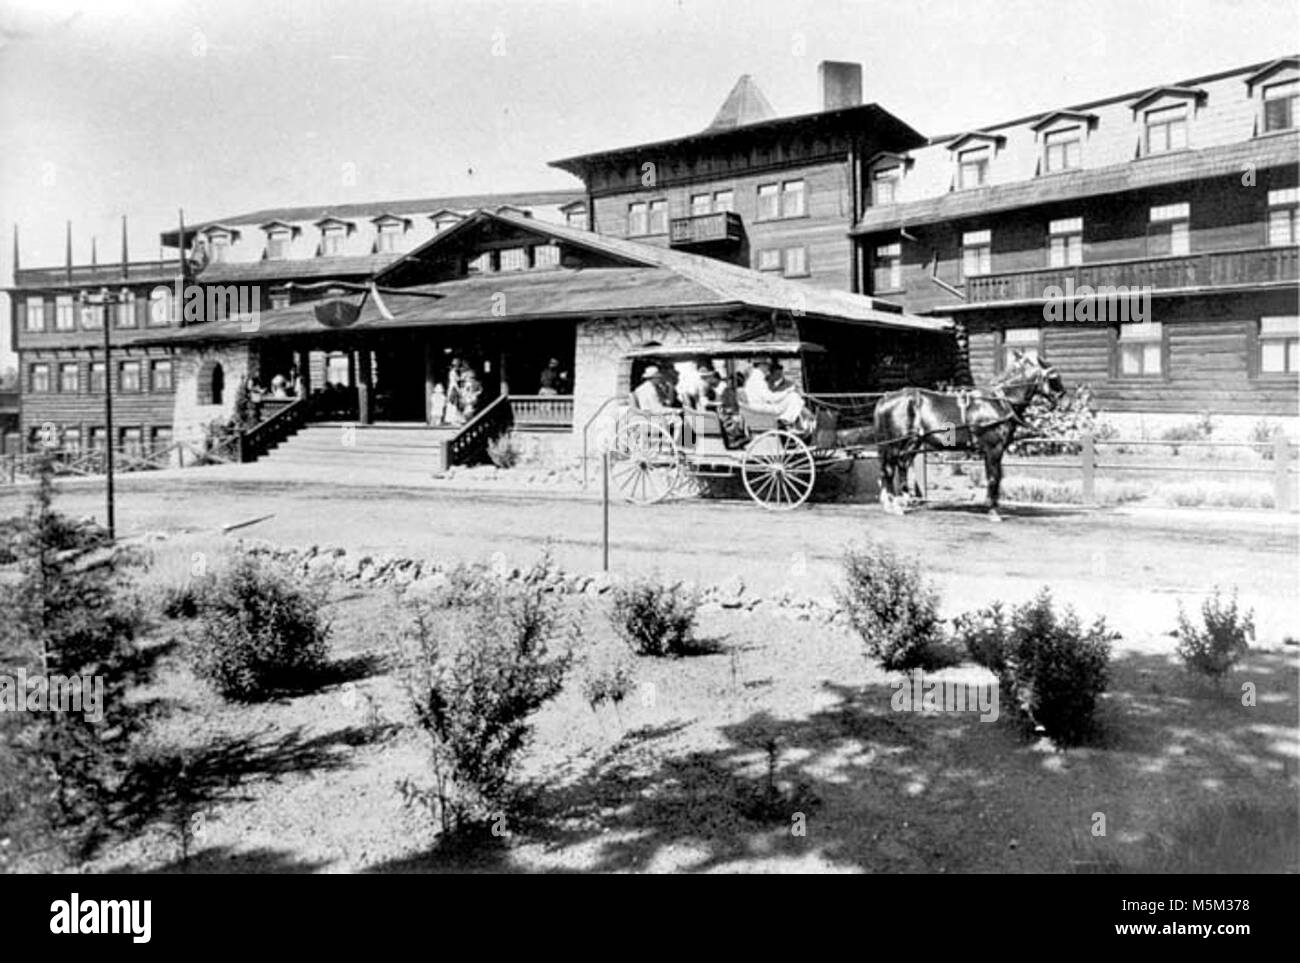 Grand Canyon Historic El Tovar Hotel . 2 HORSE CARRAIGE TO RIGHT OF FRONT ENTRANCE, EL TOVAR HOTEL. FAMILY ON PORCH. CIRCA 1908 Stock Photo